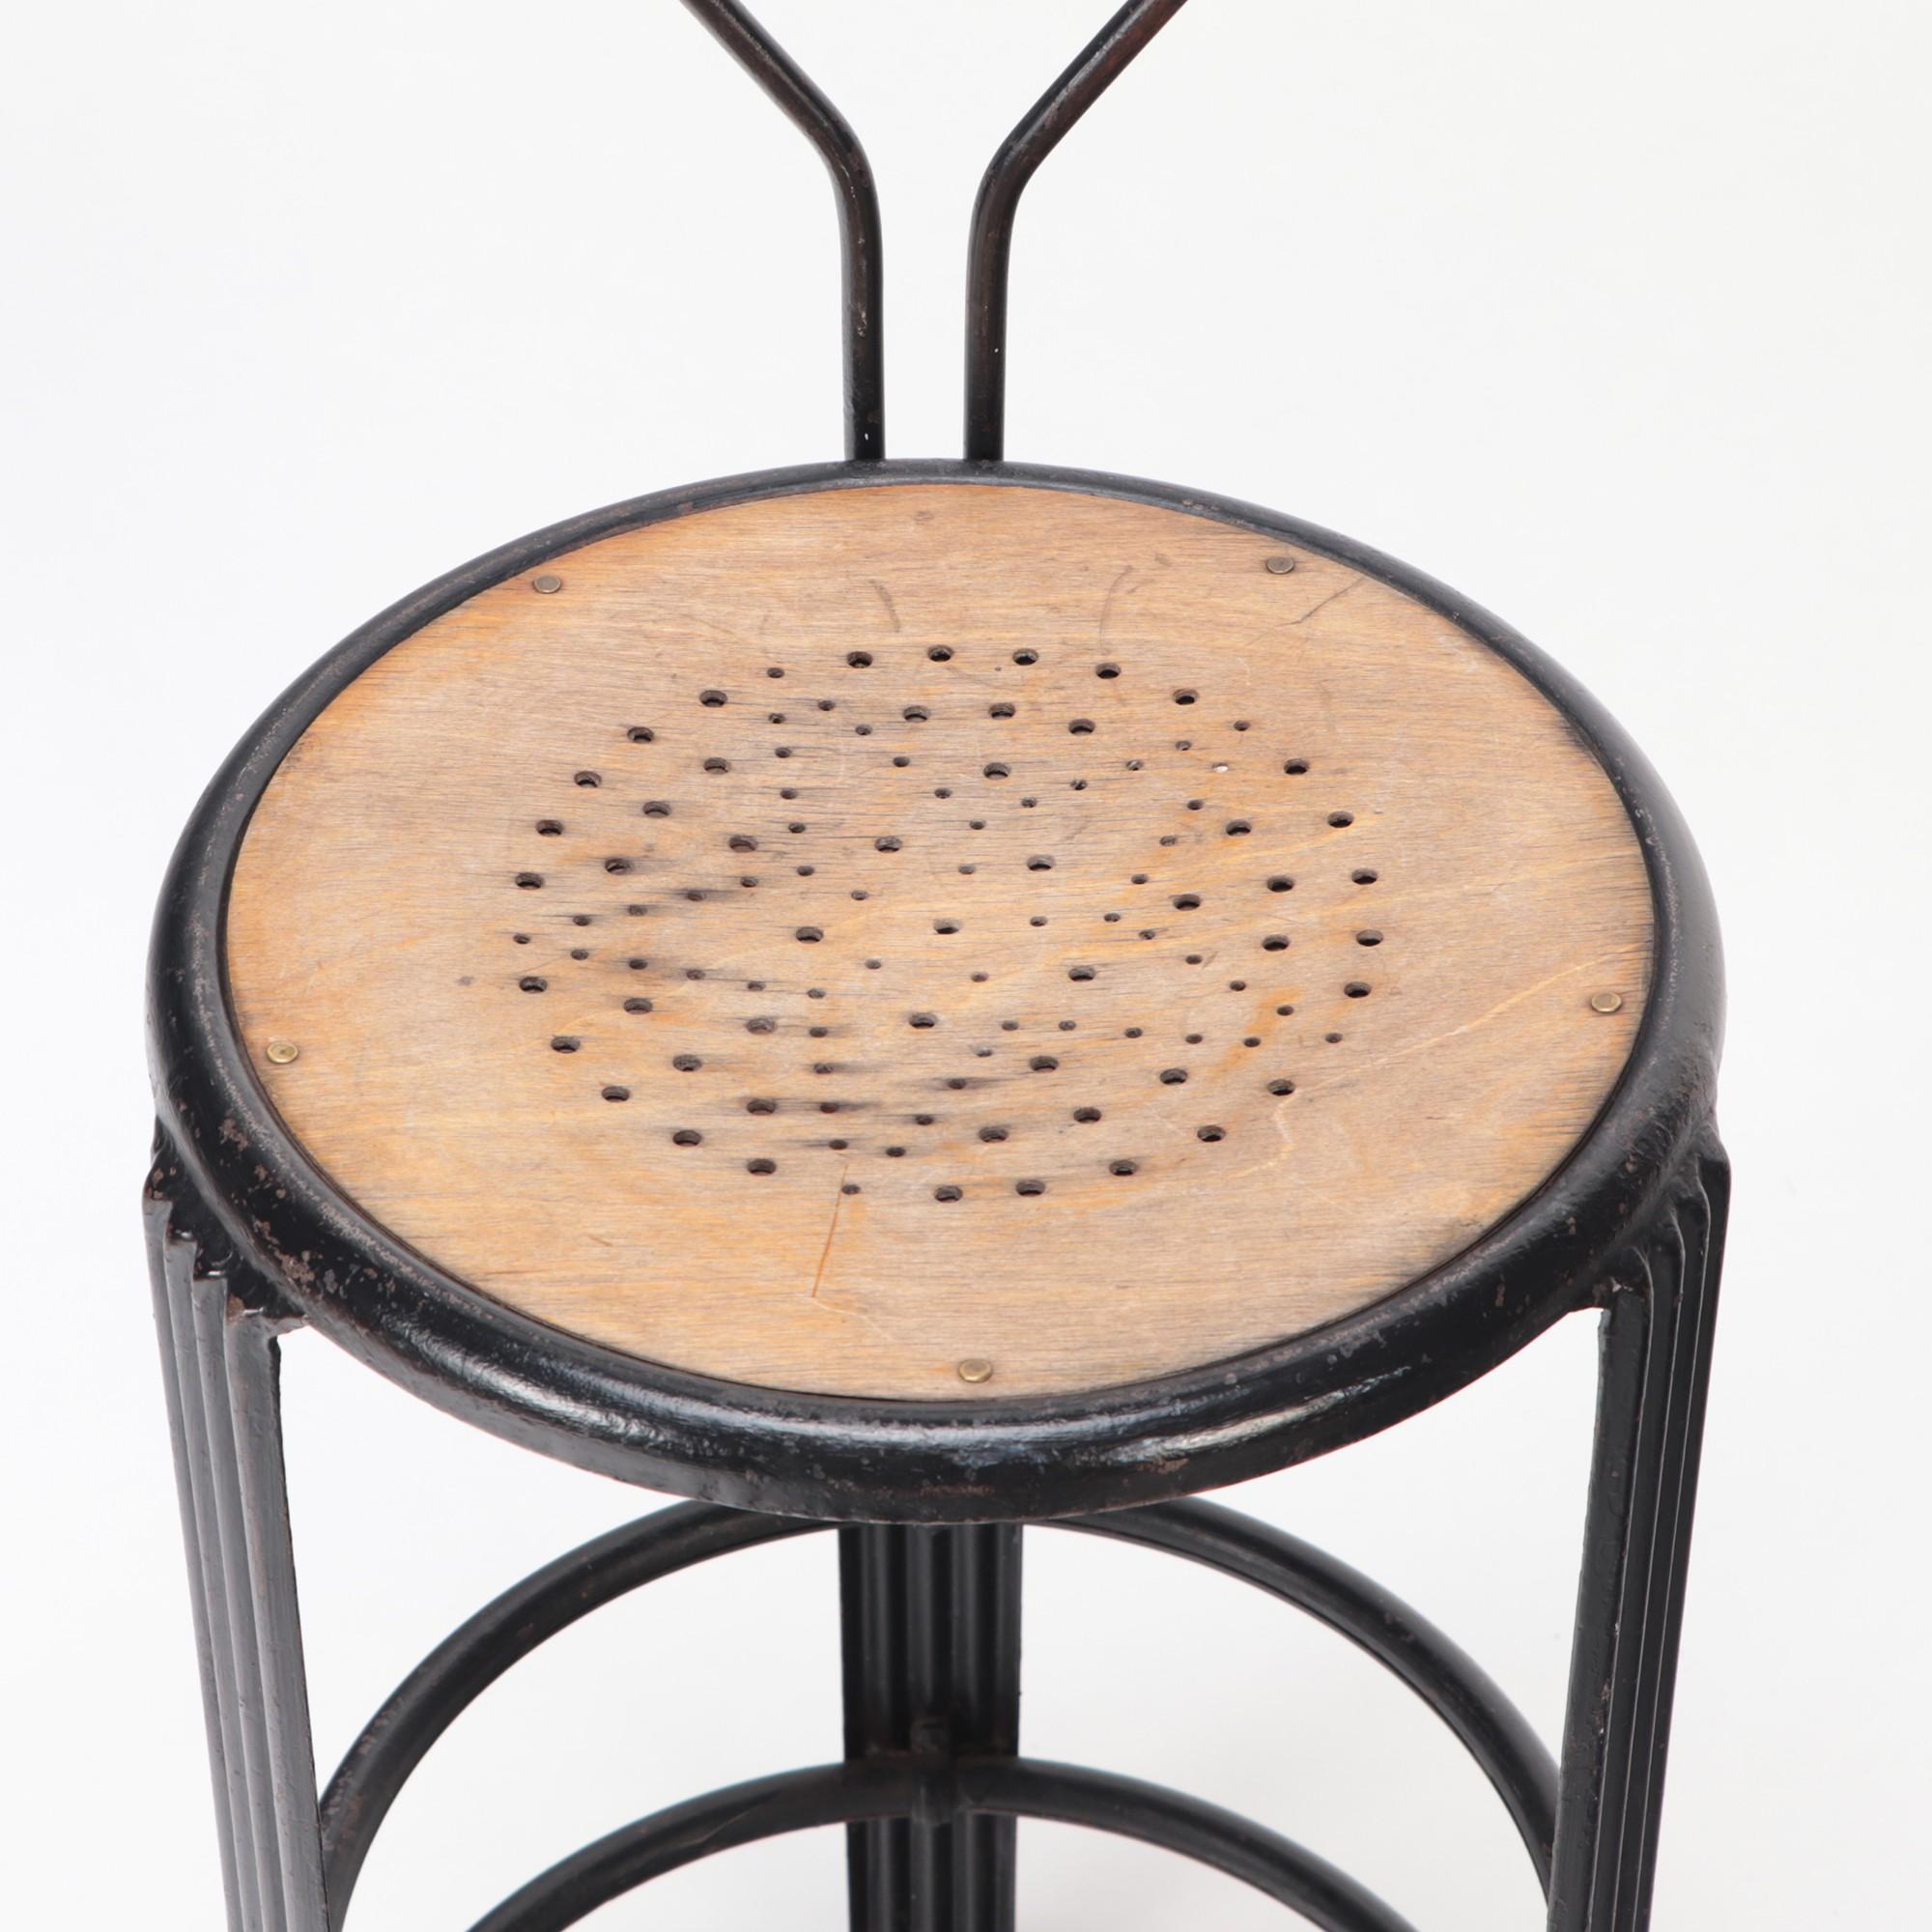 Early 20th Century French Iron Counter Stool with Wooden Seat and Backrest, C 1910 For Sale